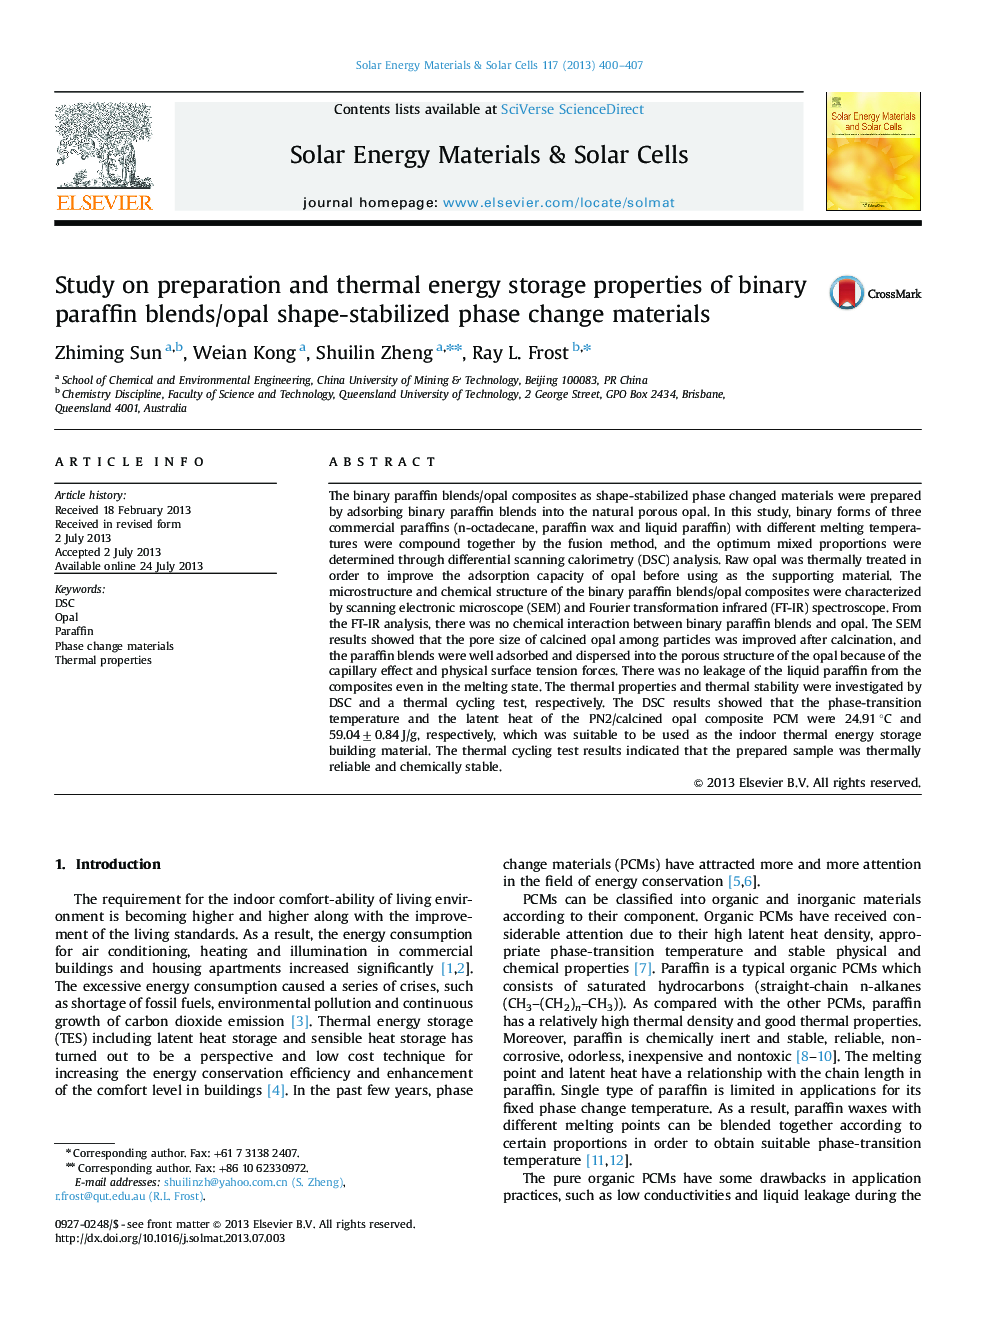 Study on preparation and thermal energy storage properties of binary paraffin blends/opal shape-stabilized phase change materials